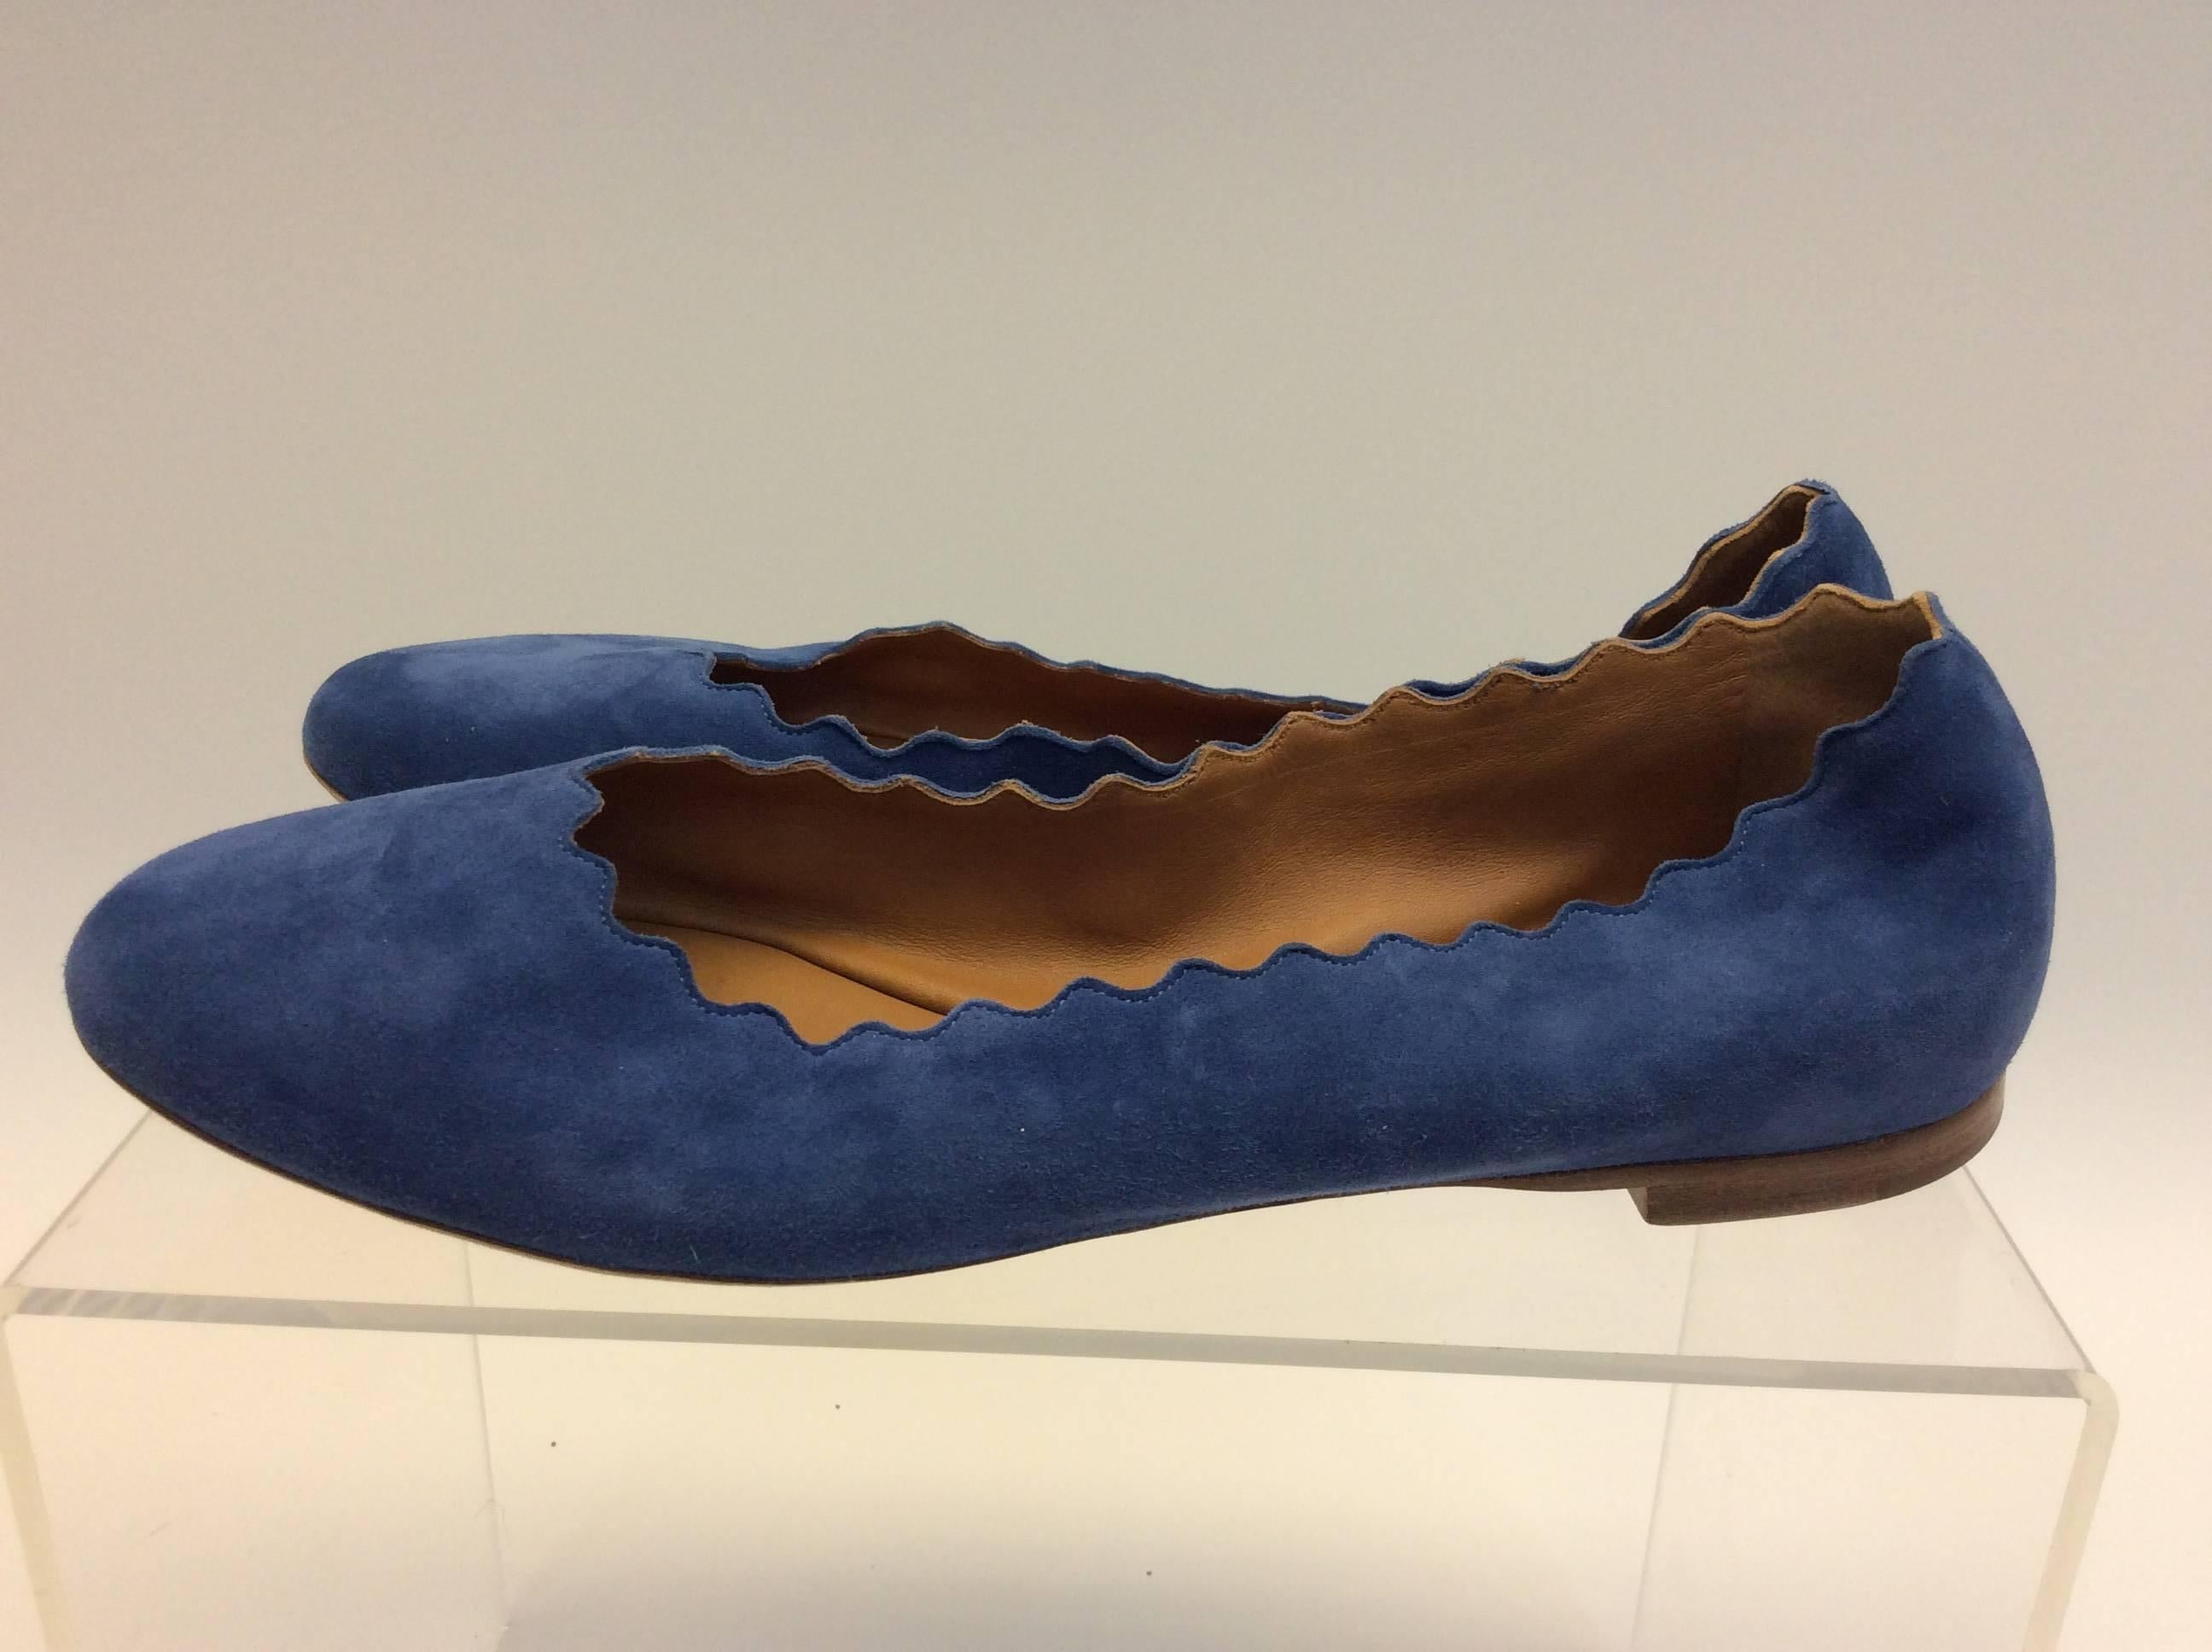 Chloe Blue Suede Flats
$365
Never worn
Suede
Made in Italy
Size 38